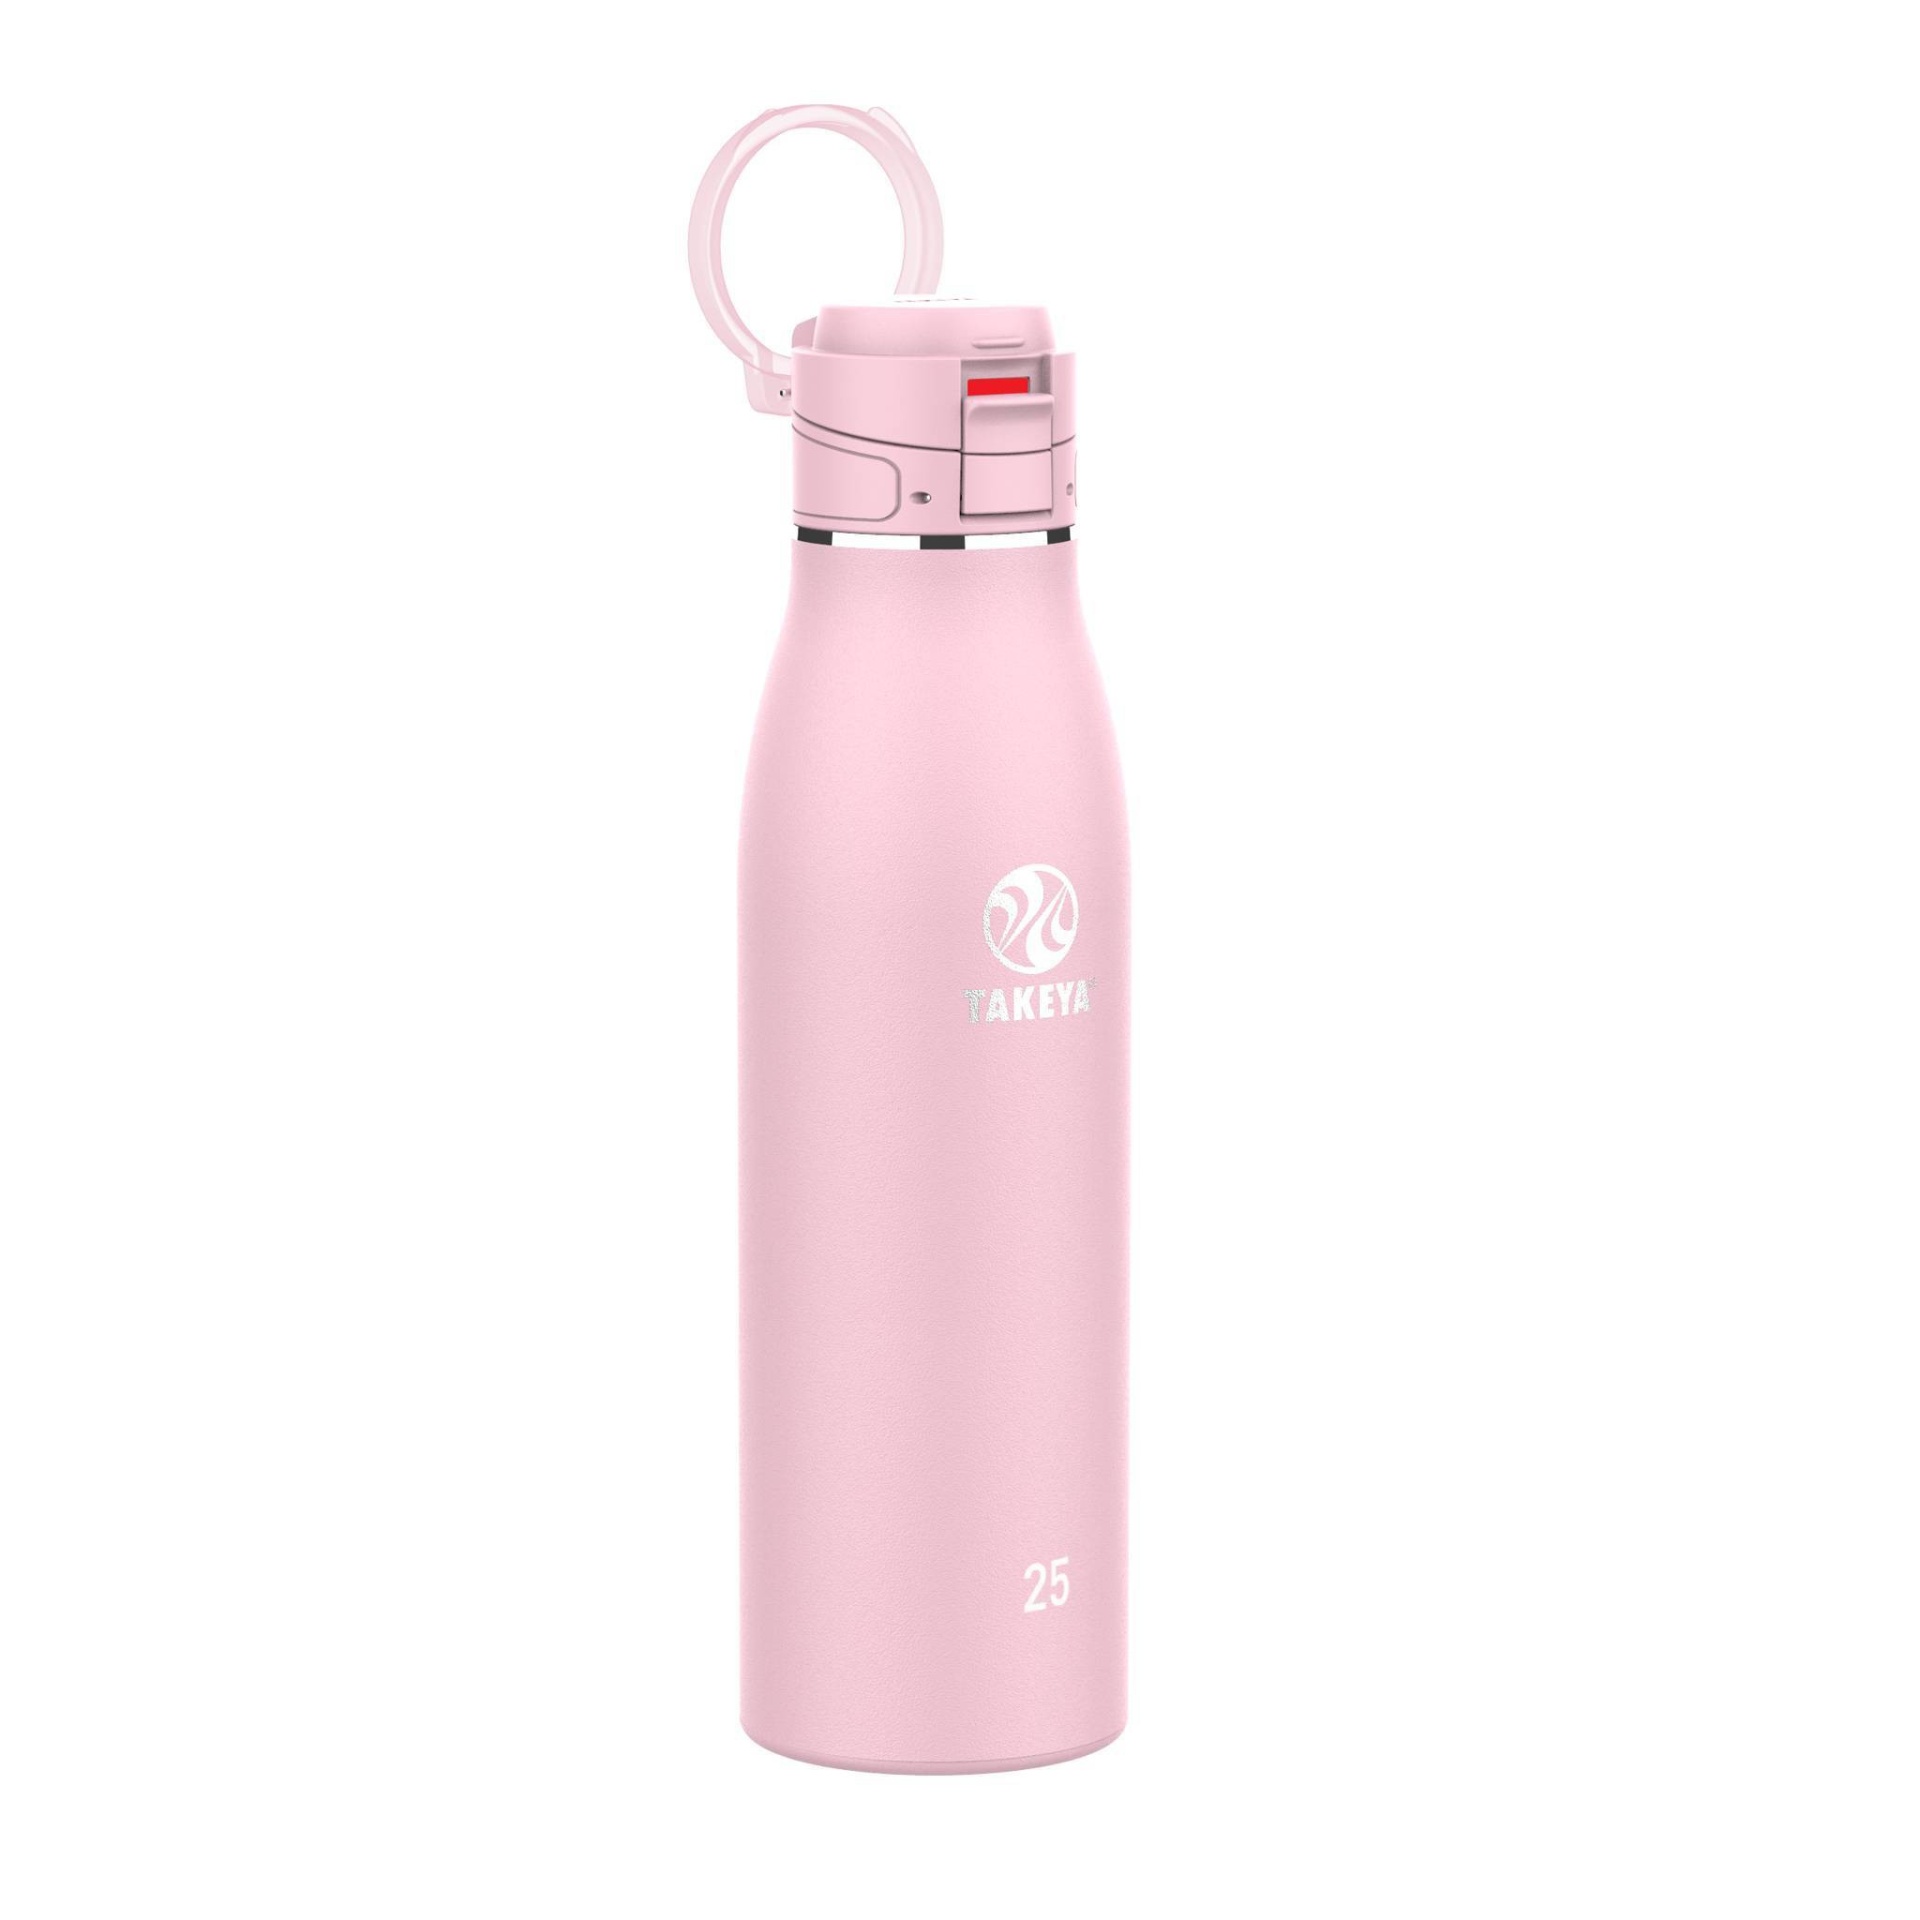 slide 1 of 3, Takeya 25oz Insulated Stainless Steel Travel Mug with Flip-Lock Spout Lid - Blush Pink, 1 ct